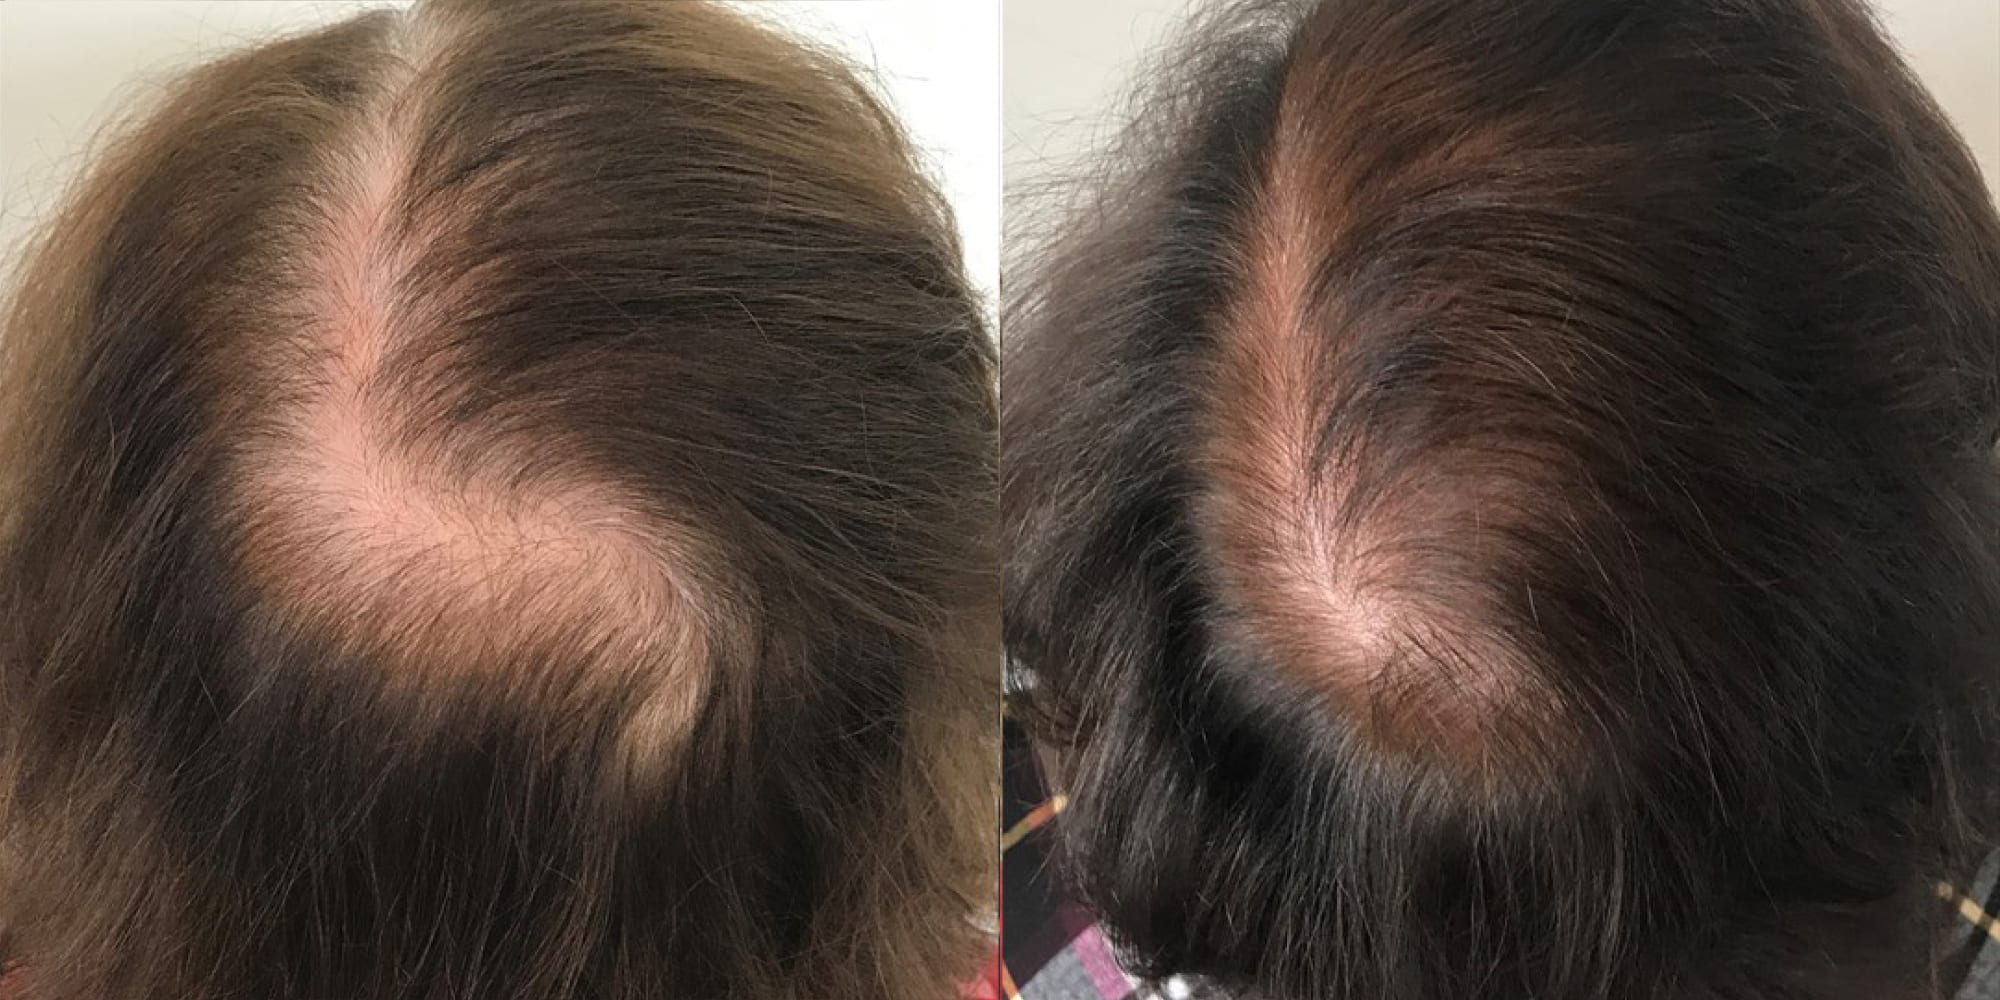 Hughes Center before and after keralase hair